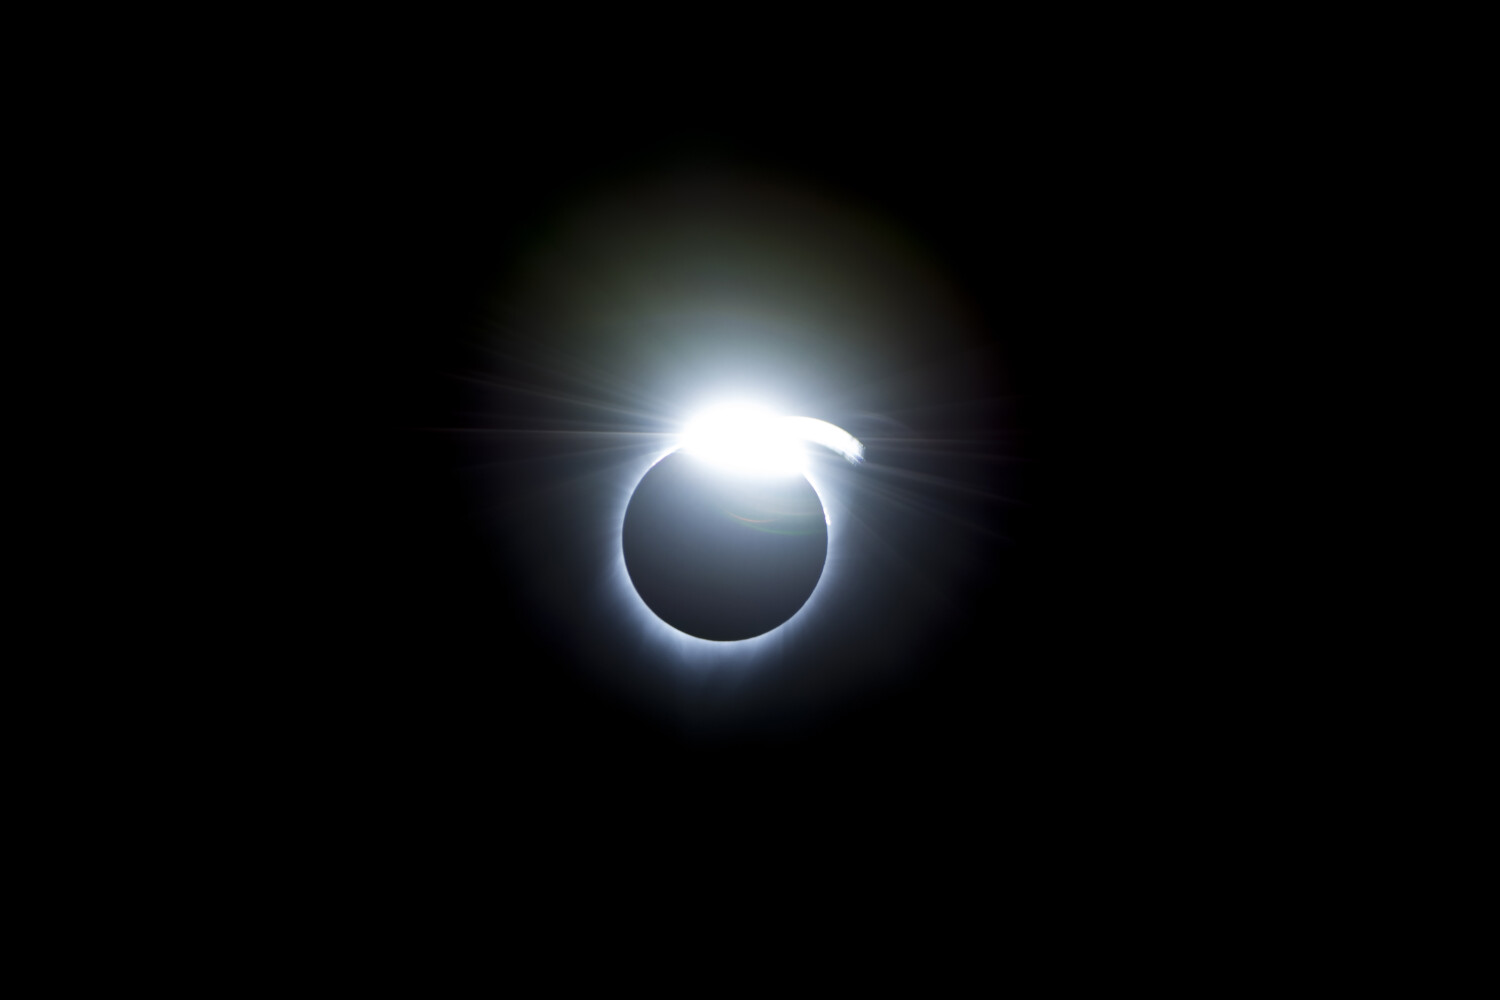 2017 total solar eclipse with 'diamond-ring effect'